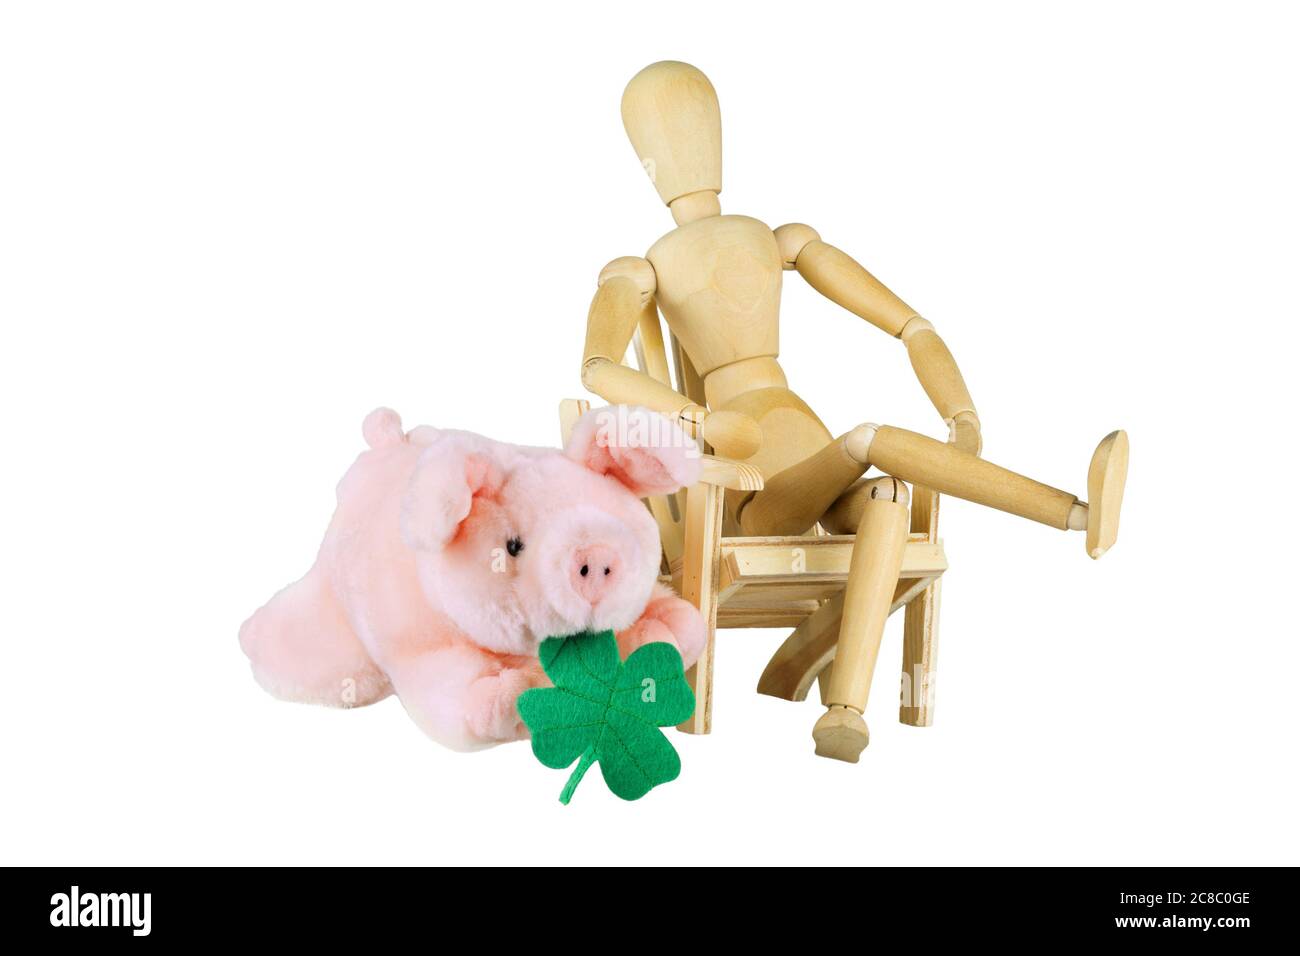 A wooden doll is sitting on a chair next to a plush piggy with shamrock over white Stock Photo